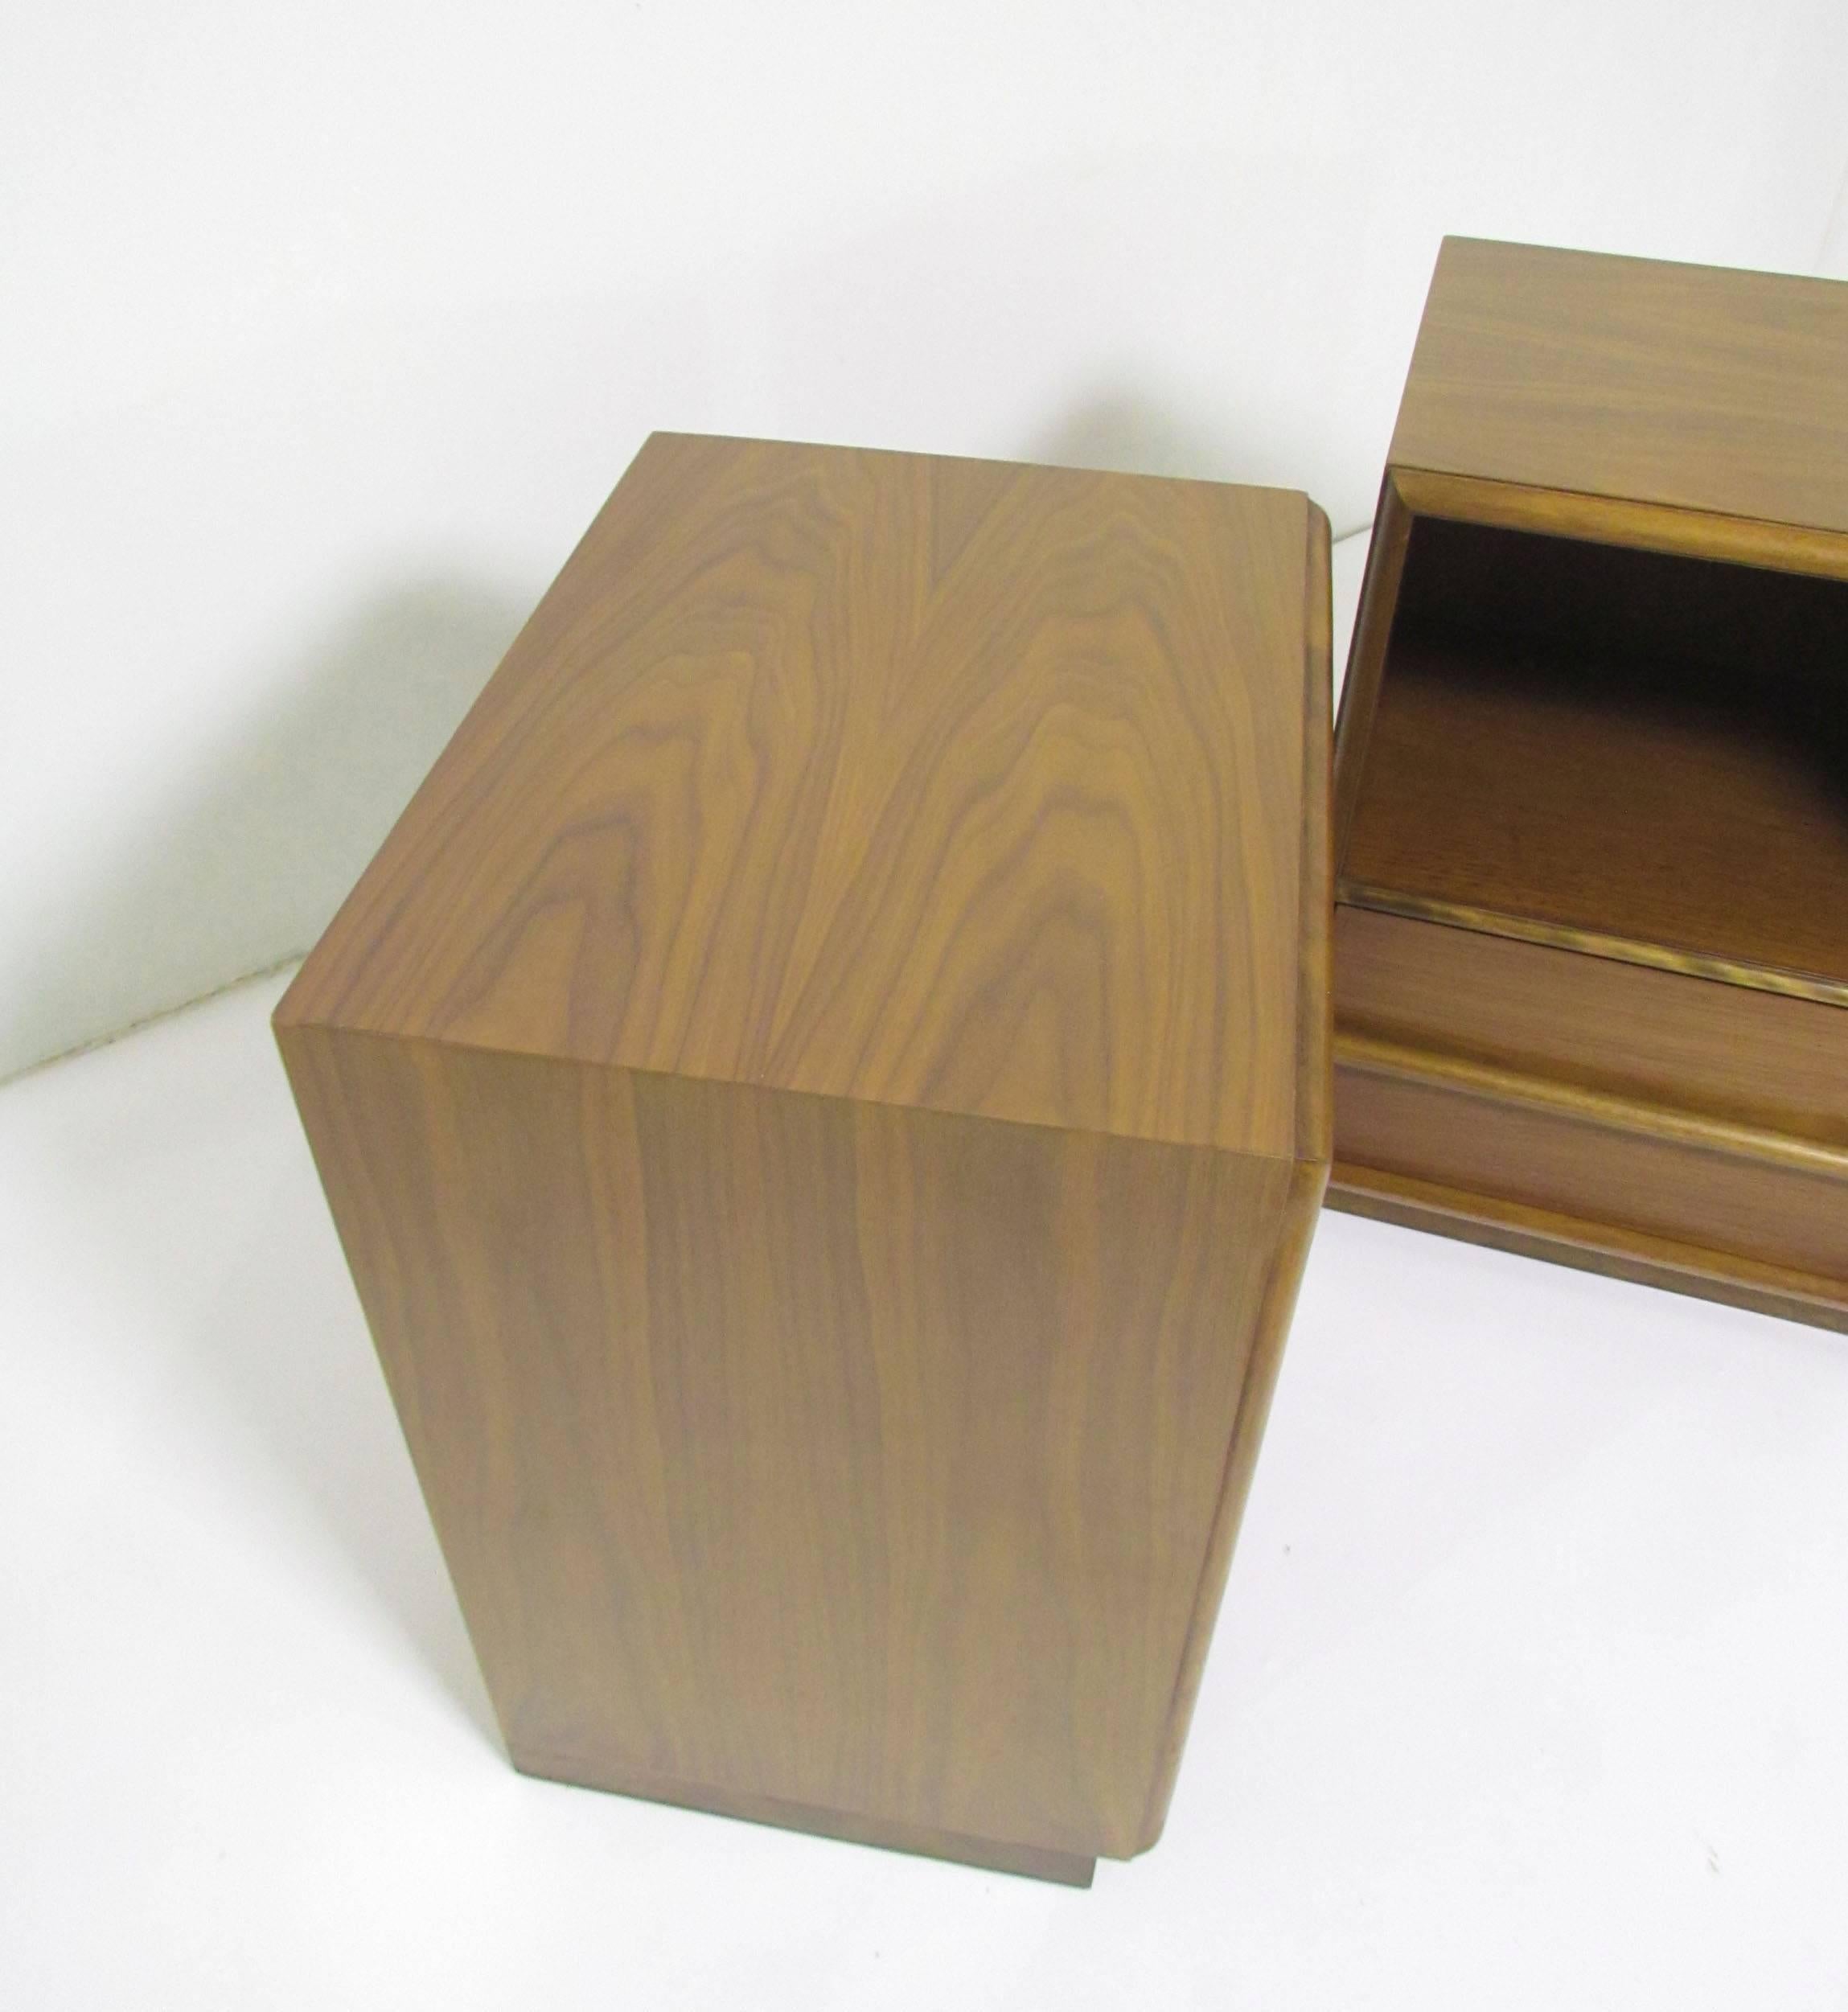 Pair of Classic Mid-Century Modern nightstands designed by T. H. Robsjohn-Gibbings for Widdicomb, circa early 1950s. Single deep drawer, with ample alcove for bedside storage.